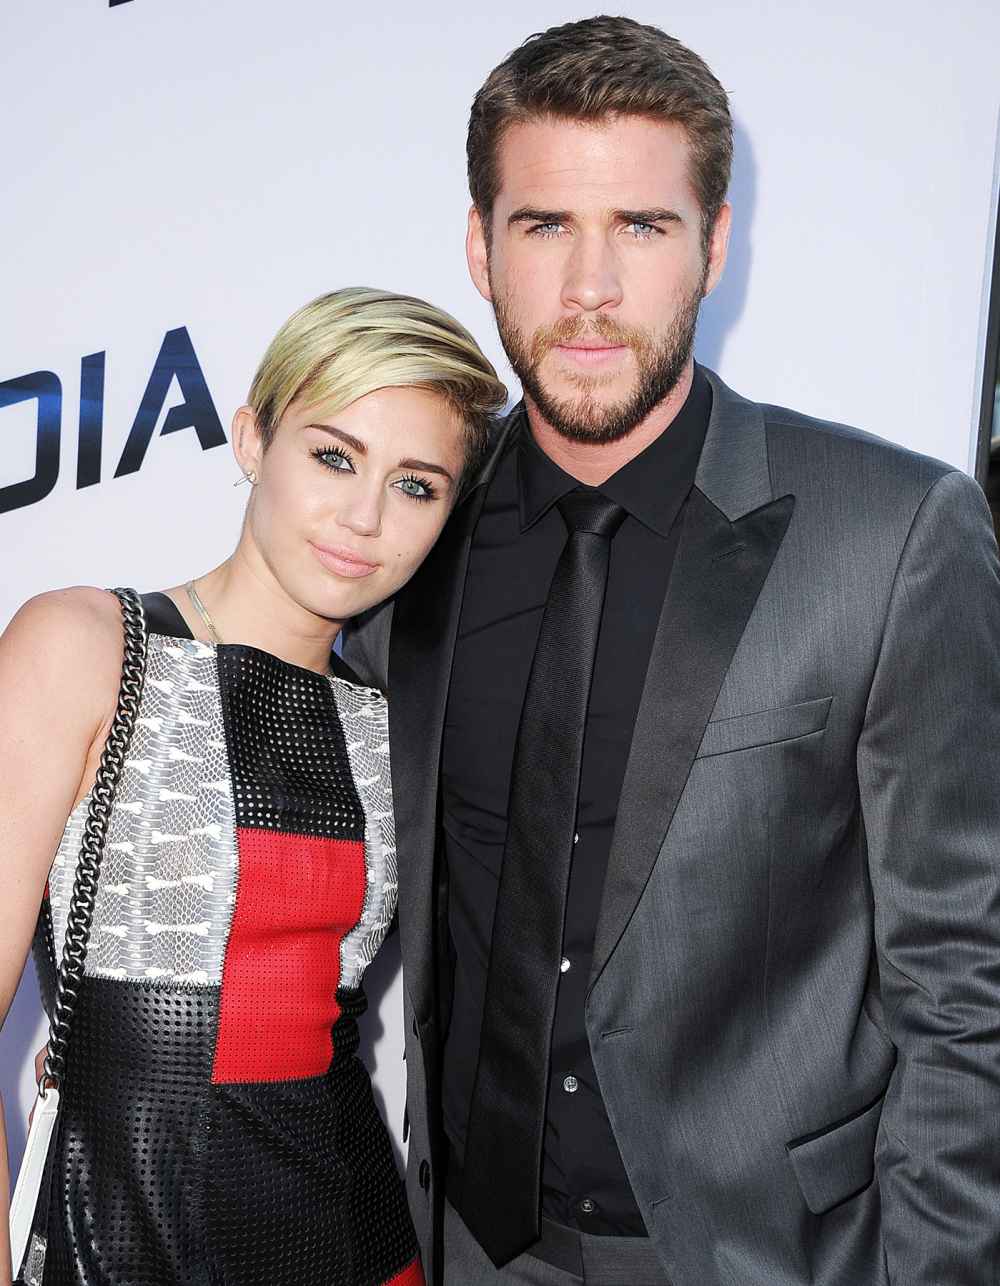 Miley Cyrus and Liam Hemsworth Not Married